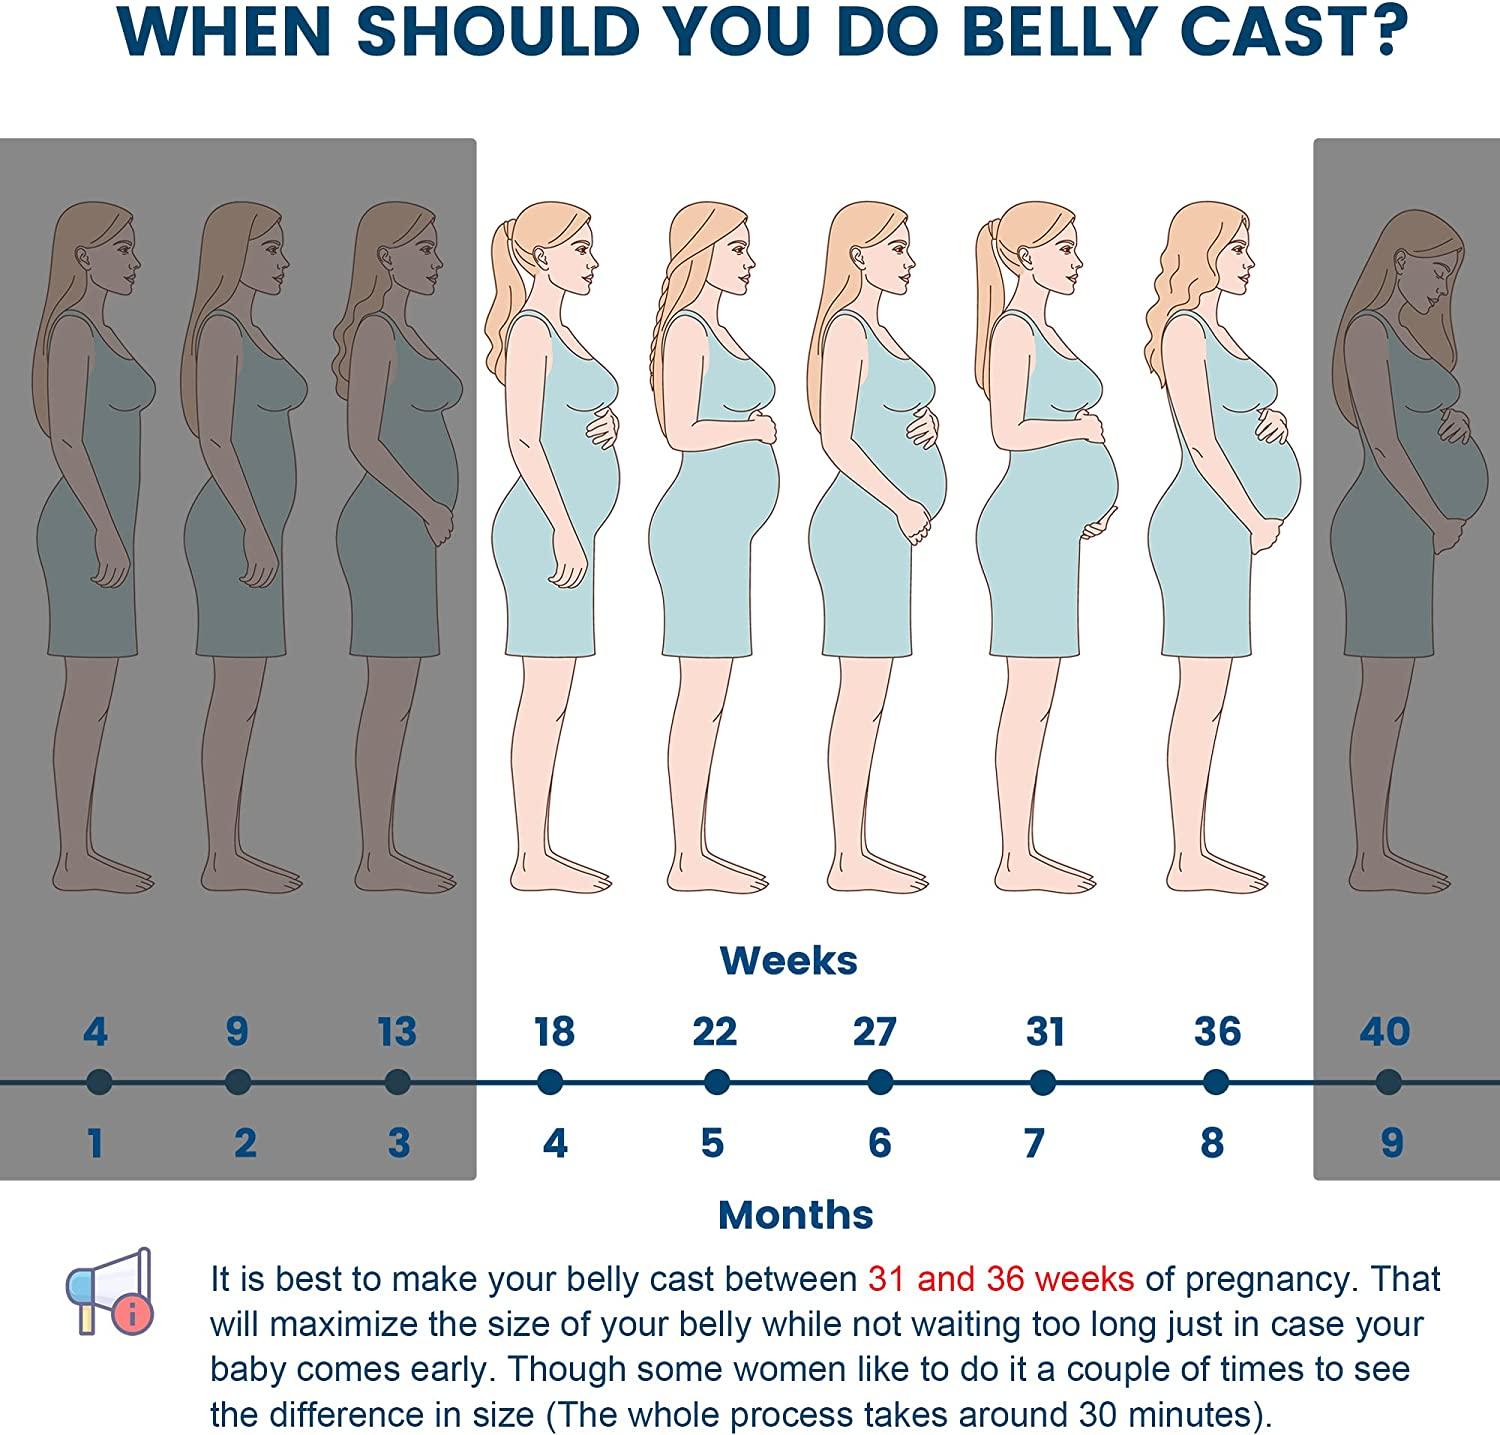 Preserve the beauty of your pregnancy forever with Belly Bowl